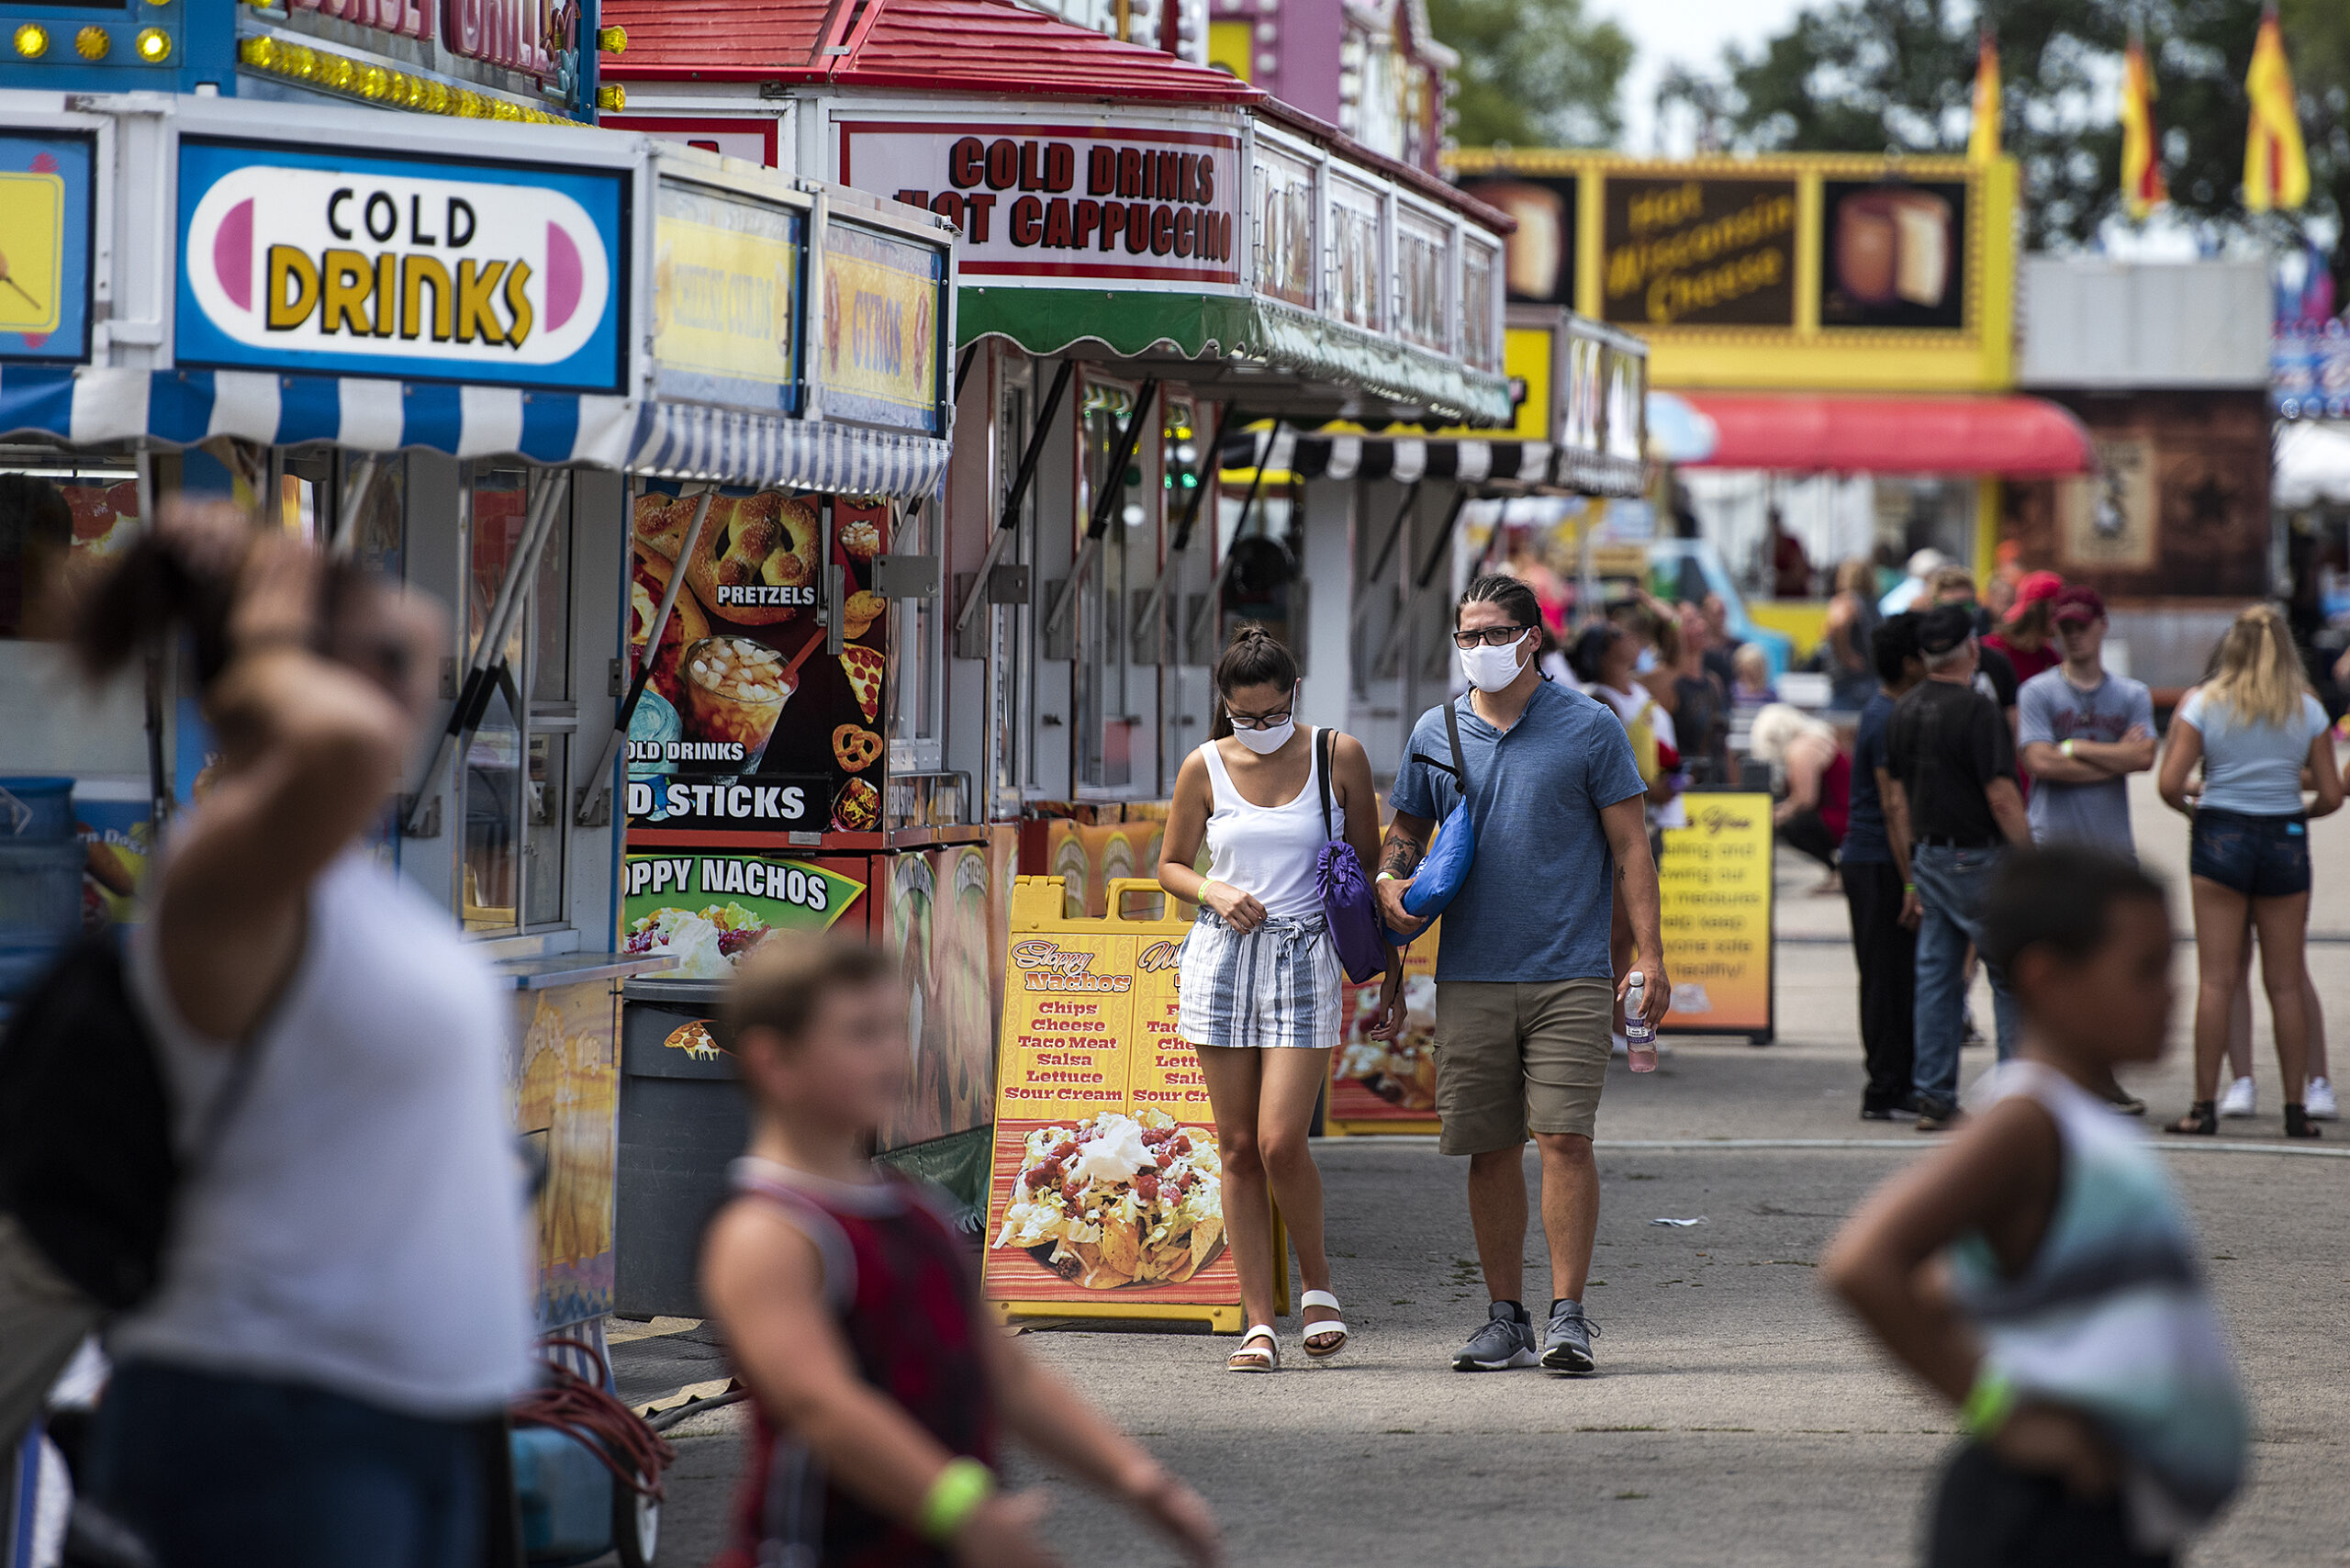 Two people in masks walk in a crowded area of the fair near food vendors